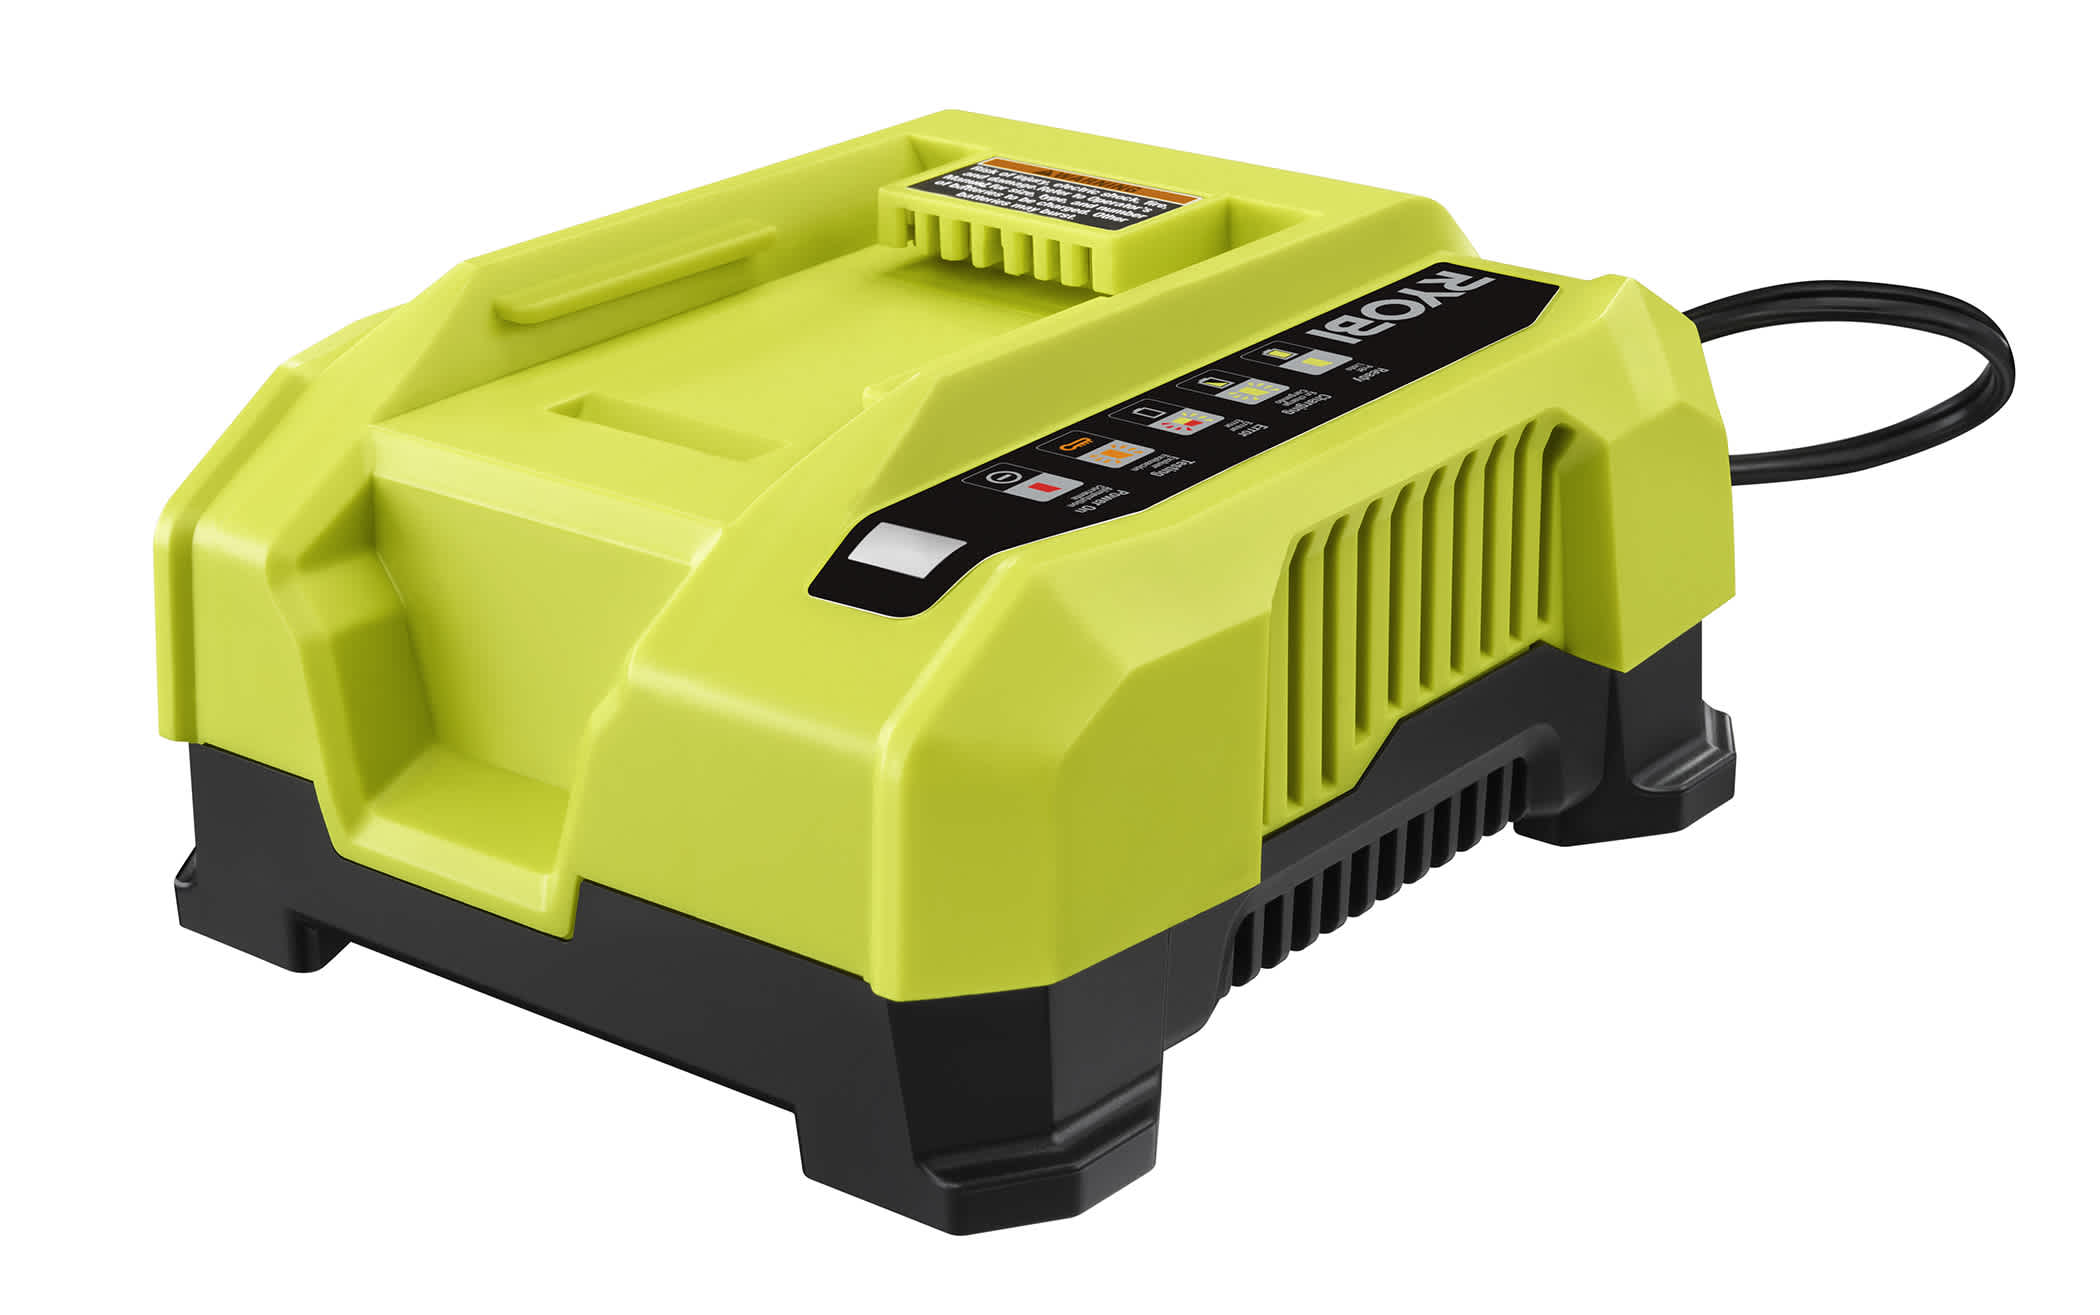 Product Features Image for 40V LITHIUM-ION RAPID CHARGER.